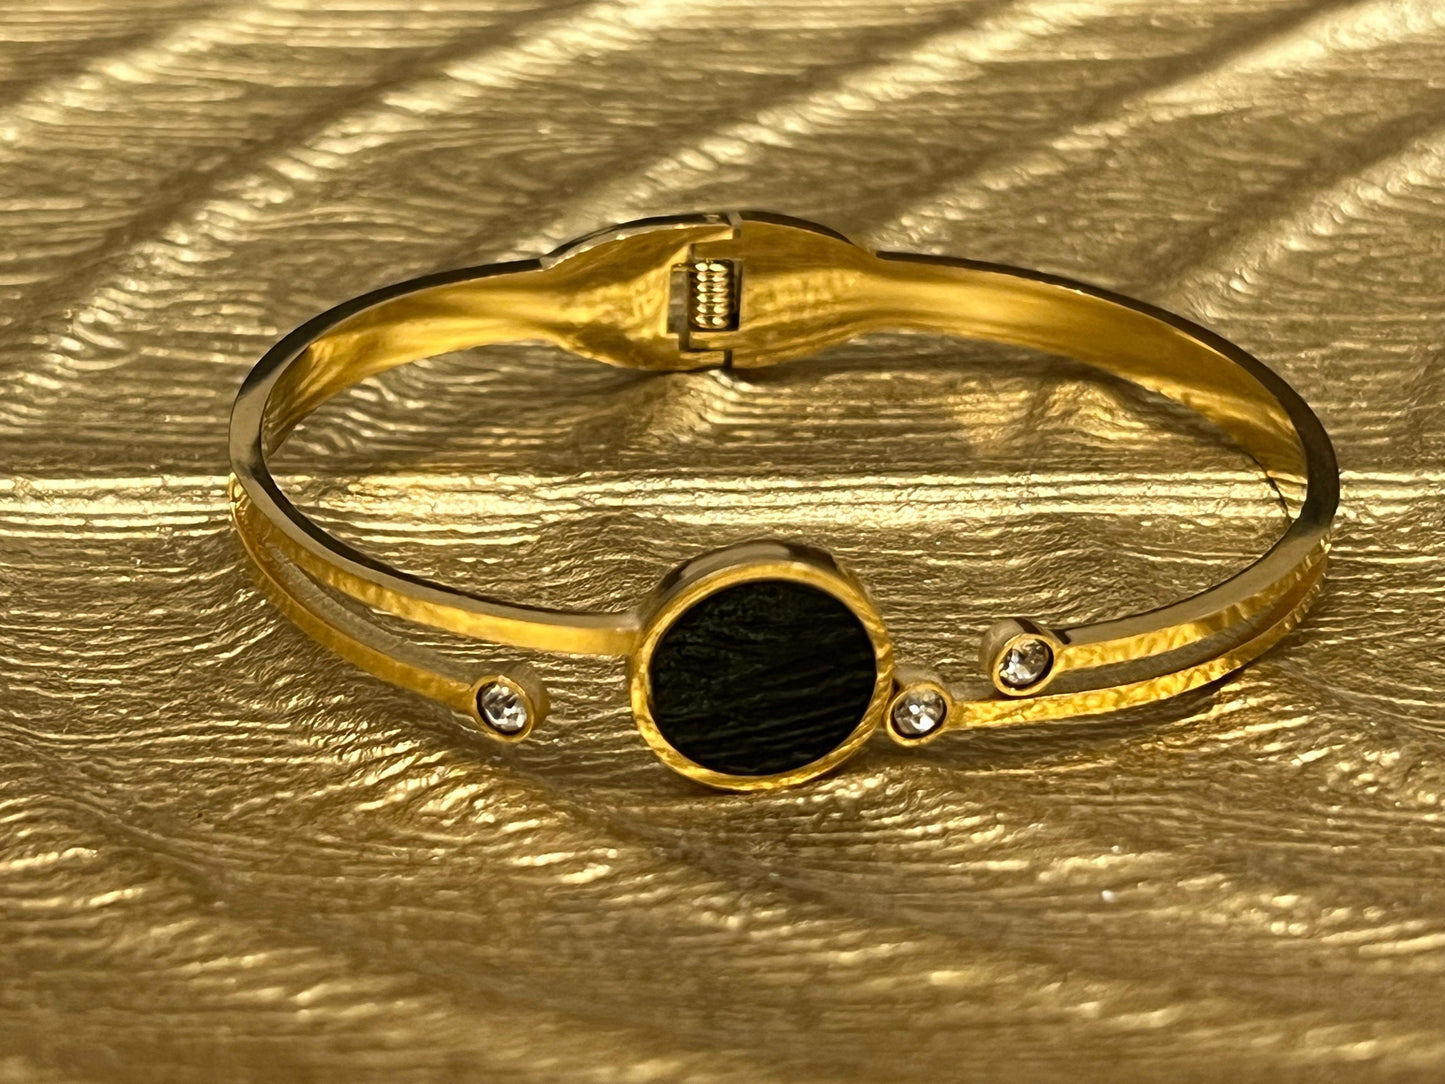 Stainless Steel Gold Bracelet  with Black Round Stone